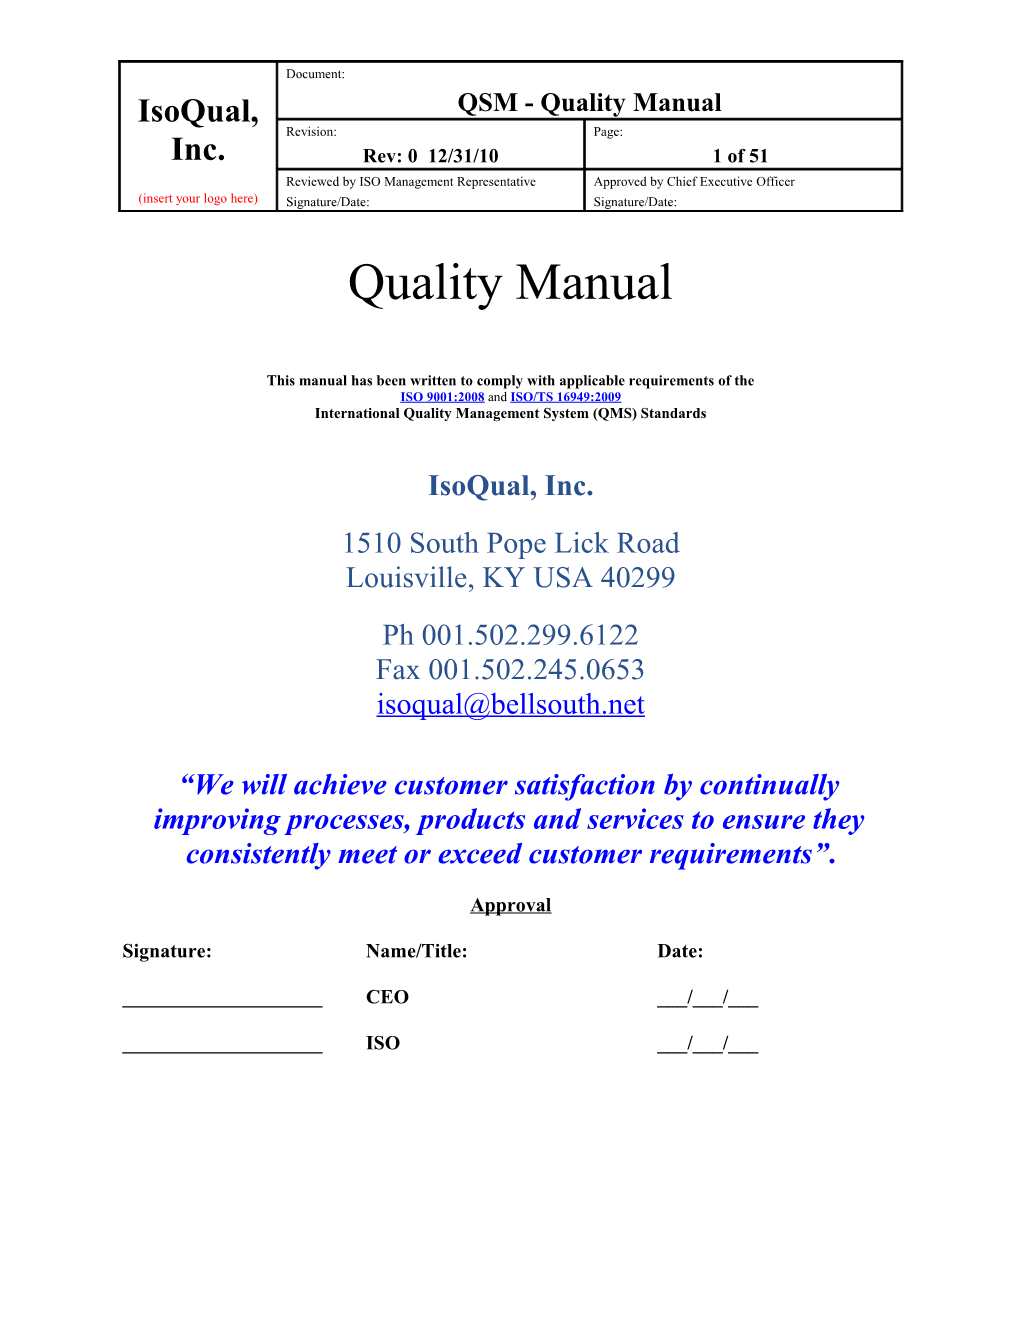 This Manual Has Been Written to Comply with Applicable Requirements of The